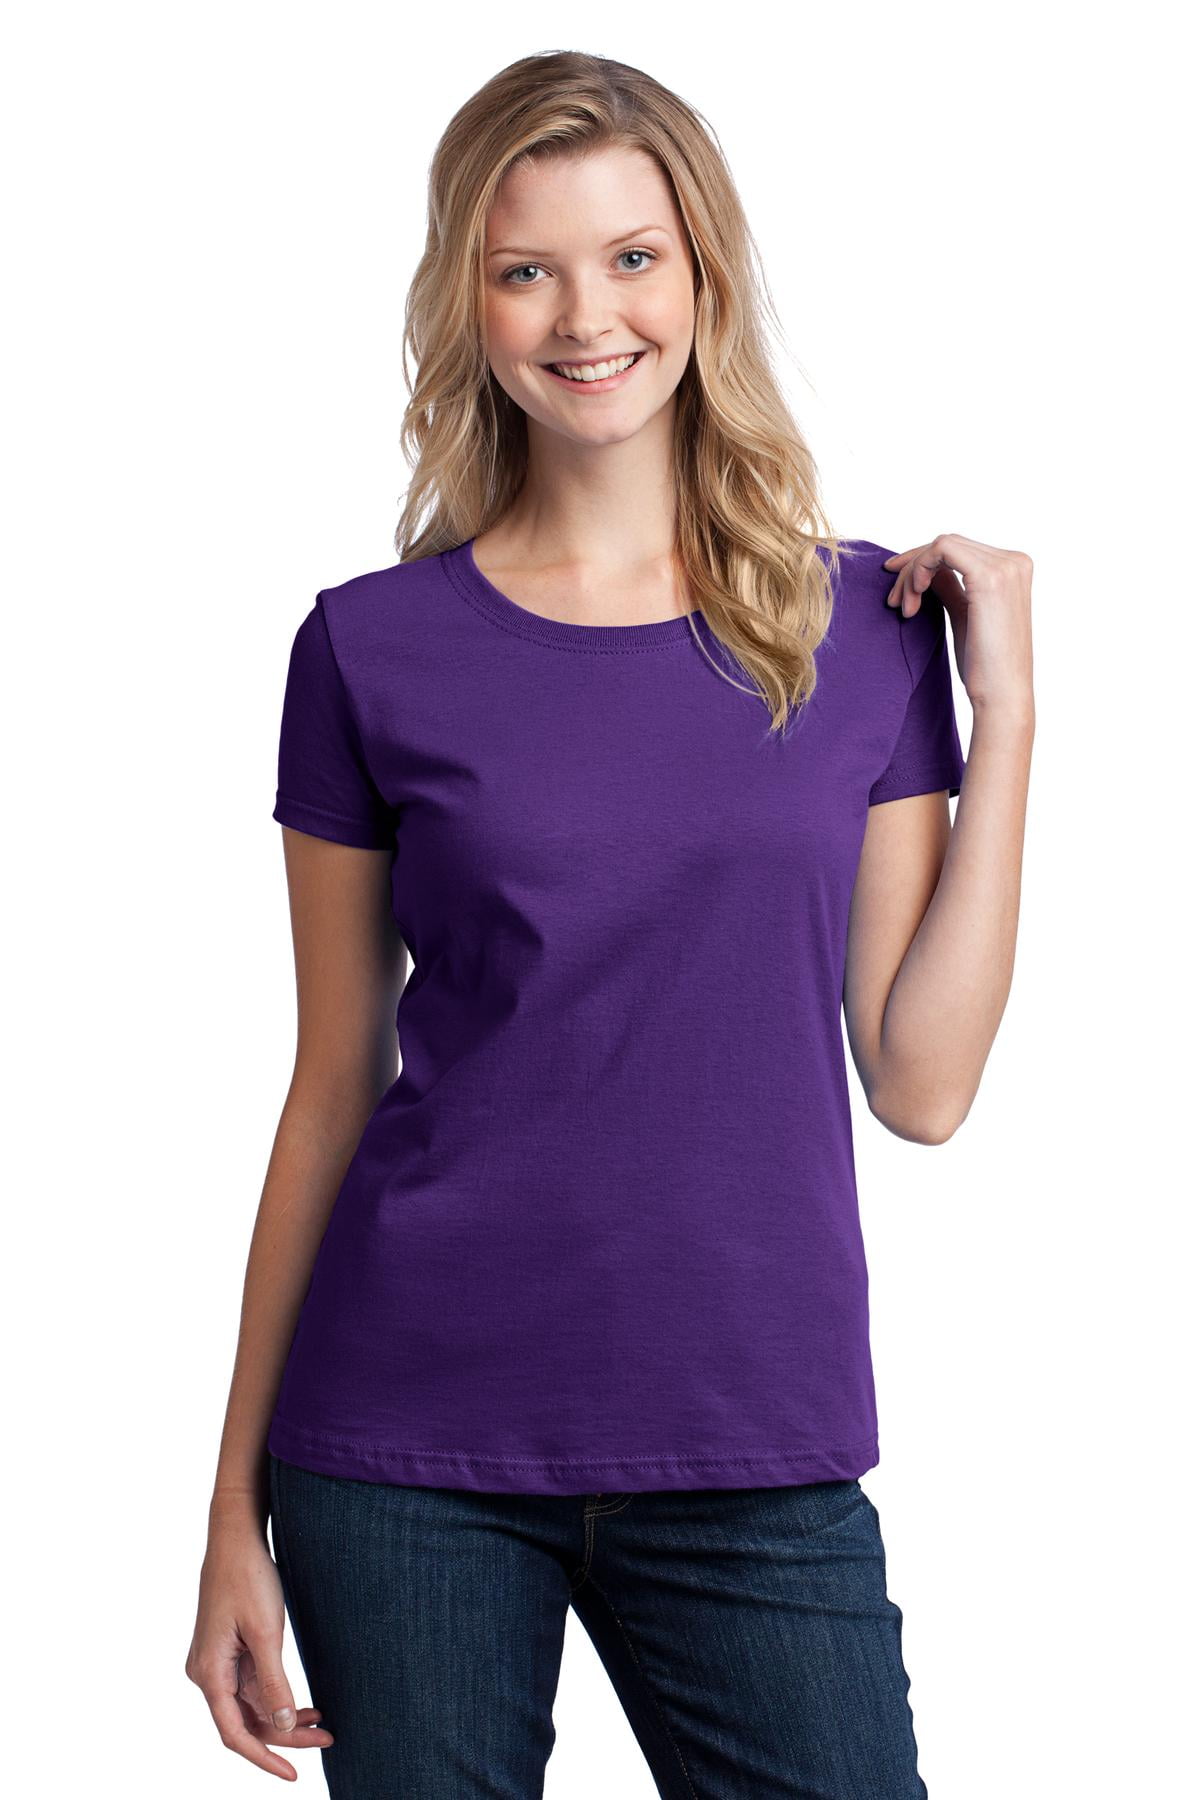 DISCONTINUED Fruit of the Loom ® Ladies HD Cotton 100% Cotton T-Shirt ...